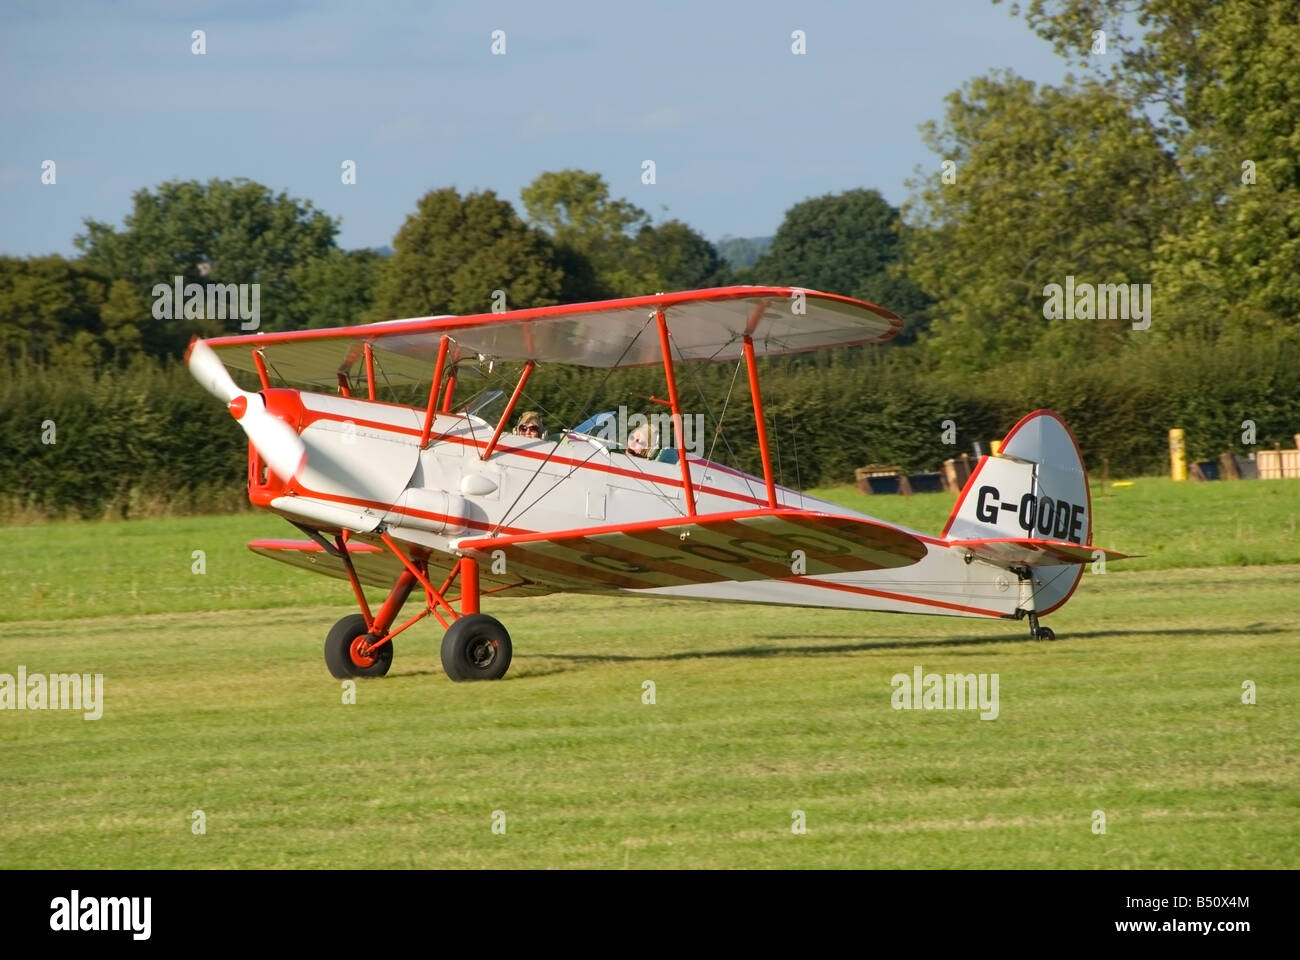 Stampe SV4C G-OODE  aircraft taxies at Headcorn (Lashenden) airfield Stock Photo